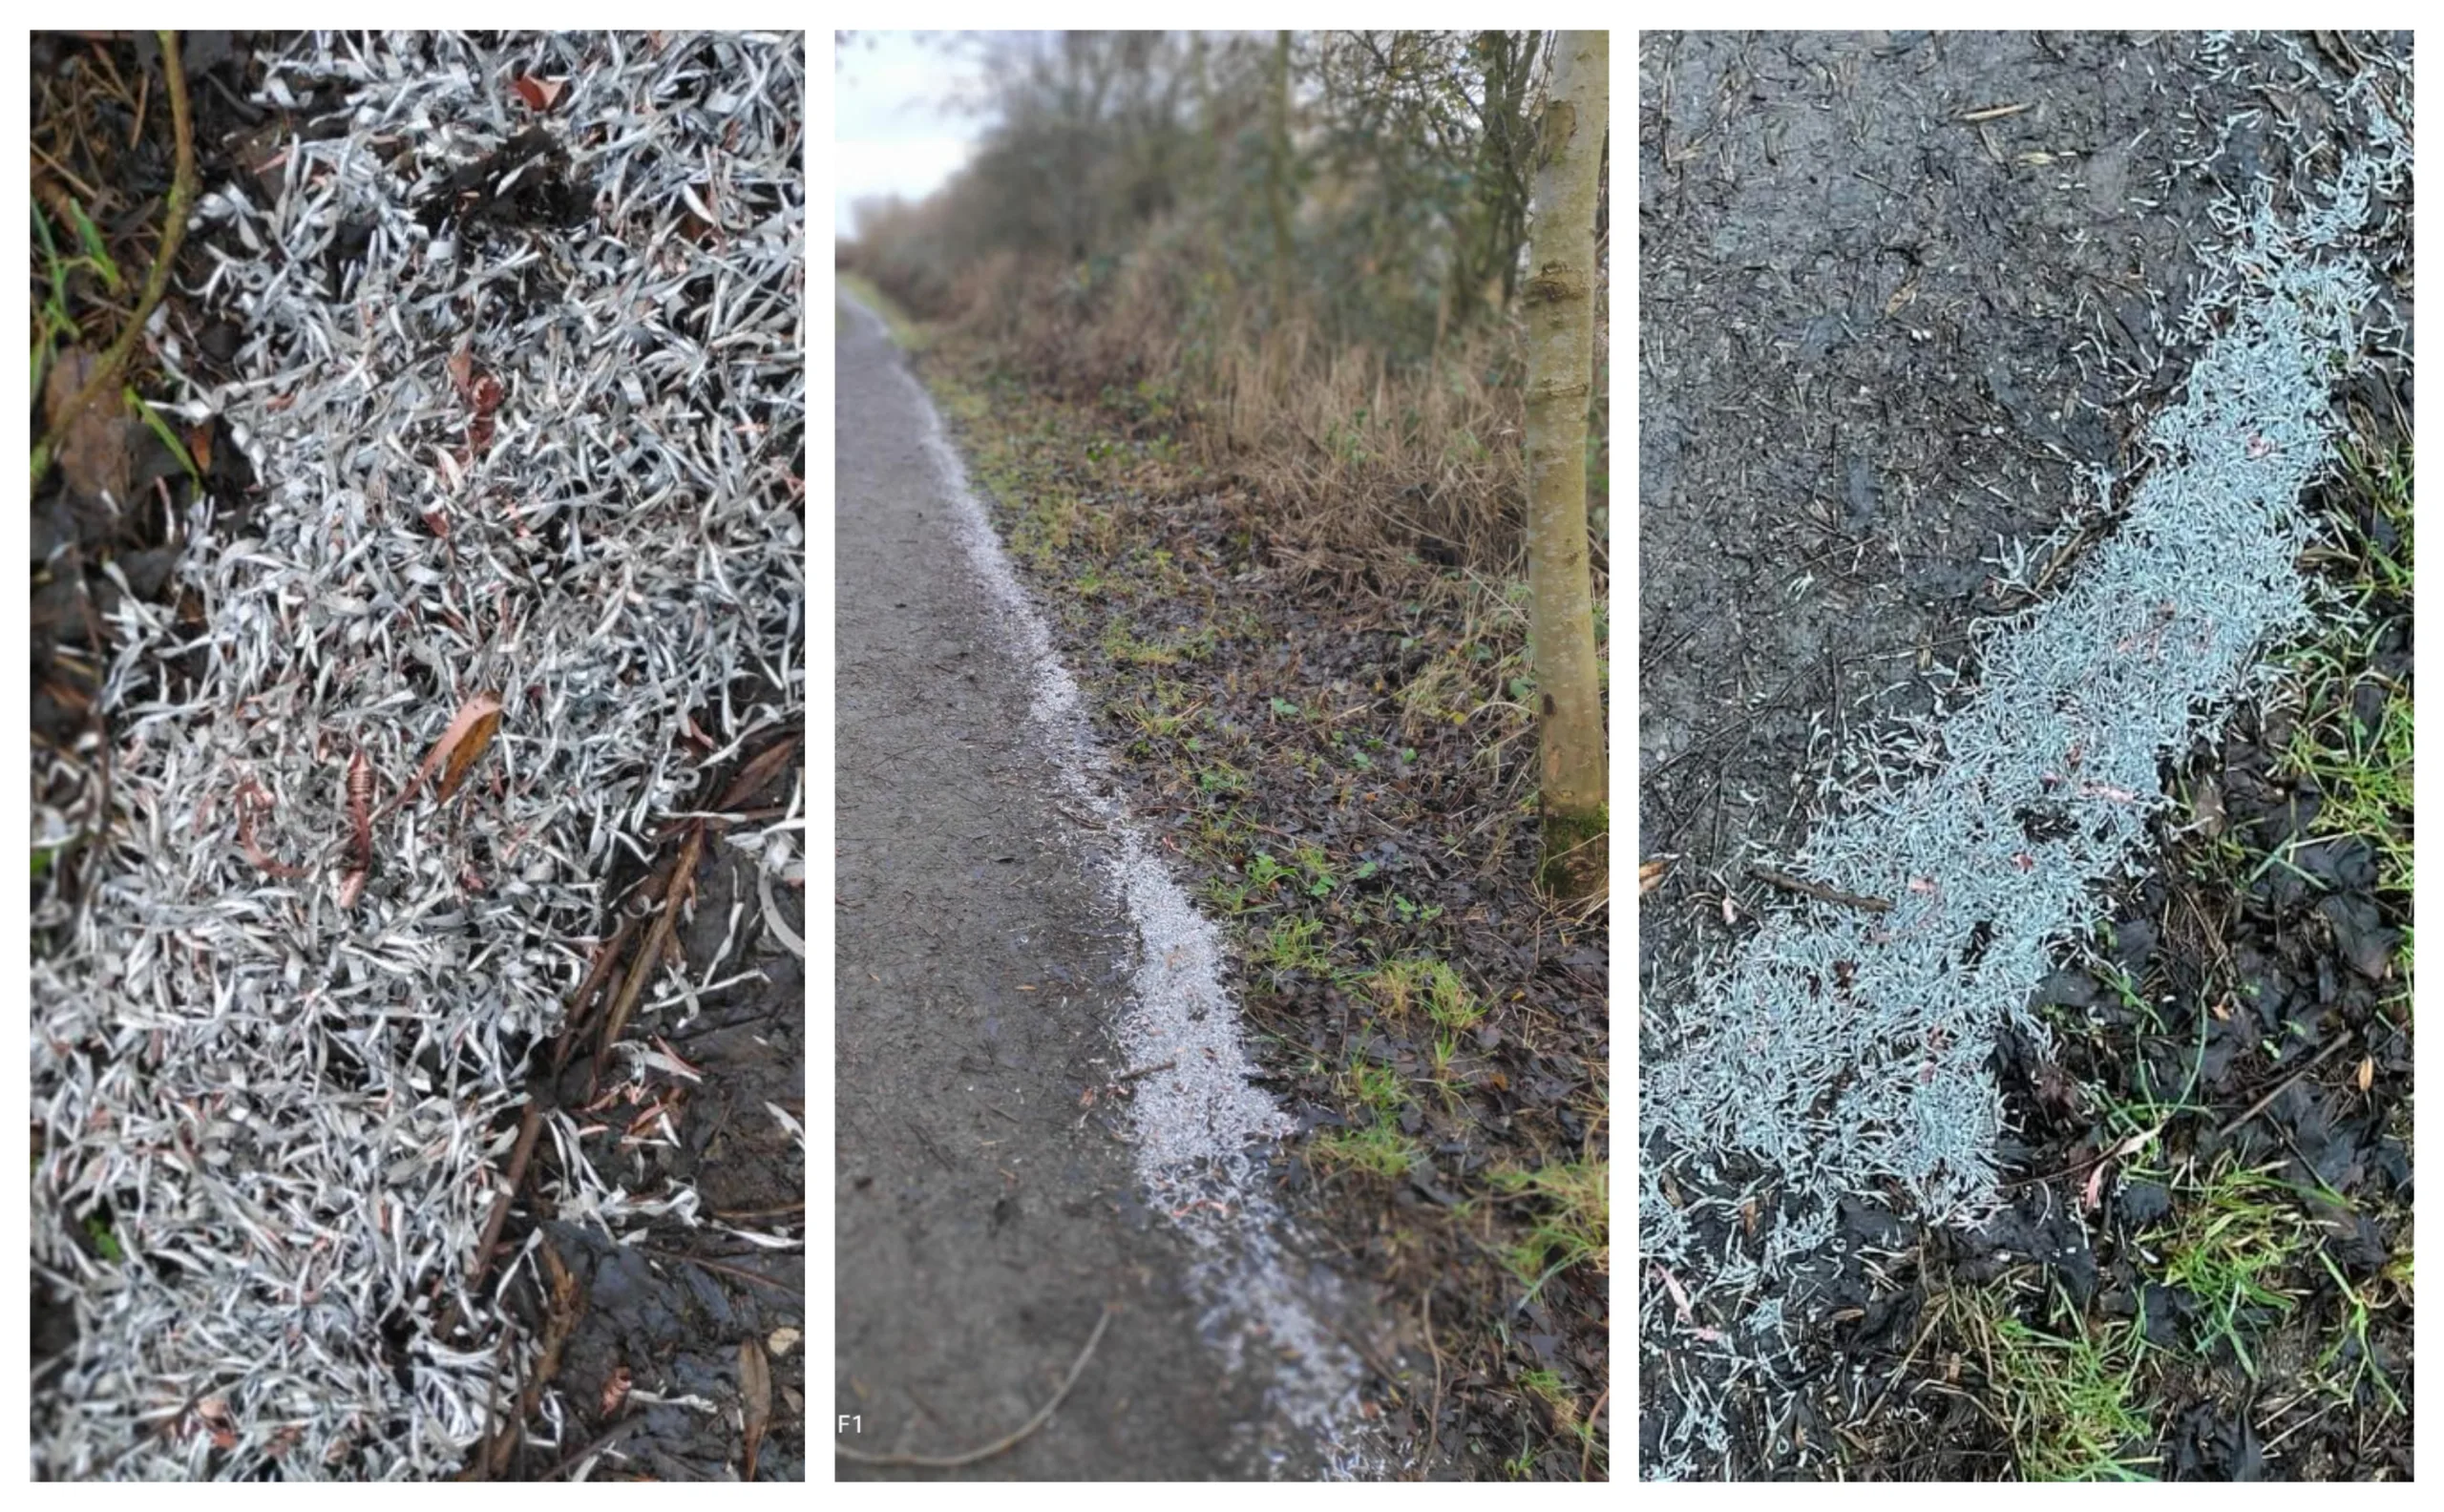 Photos of the razor-sharp metal shavings that appeared on Tuesday on this popular path in March, Cambridgeshire.